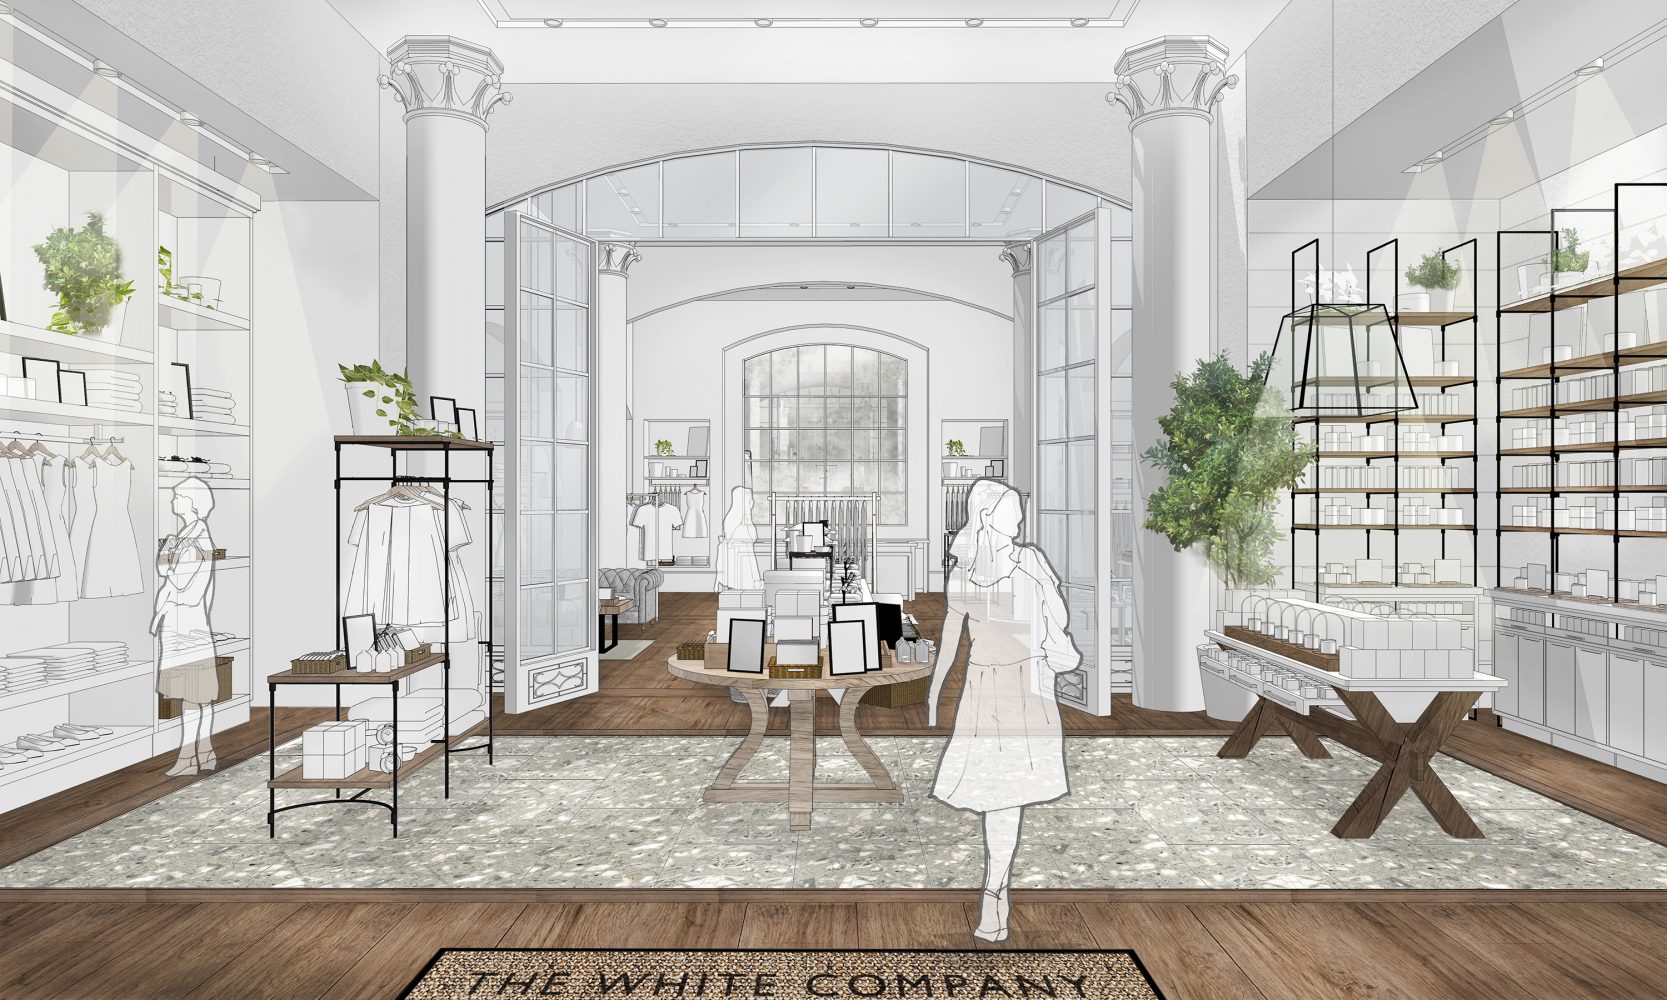 Interior visual of The White Company New York Flagship Design, by Household.